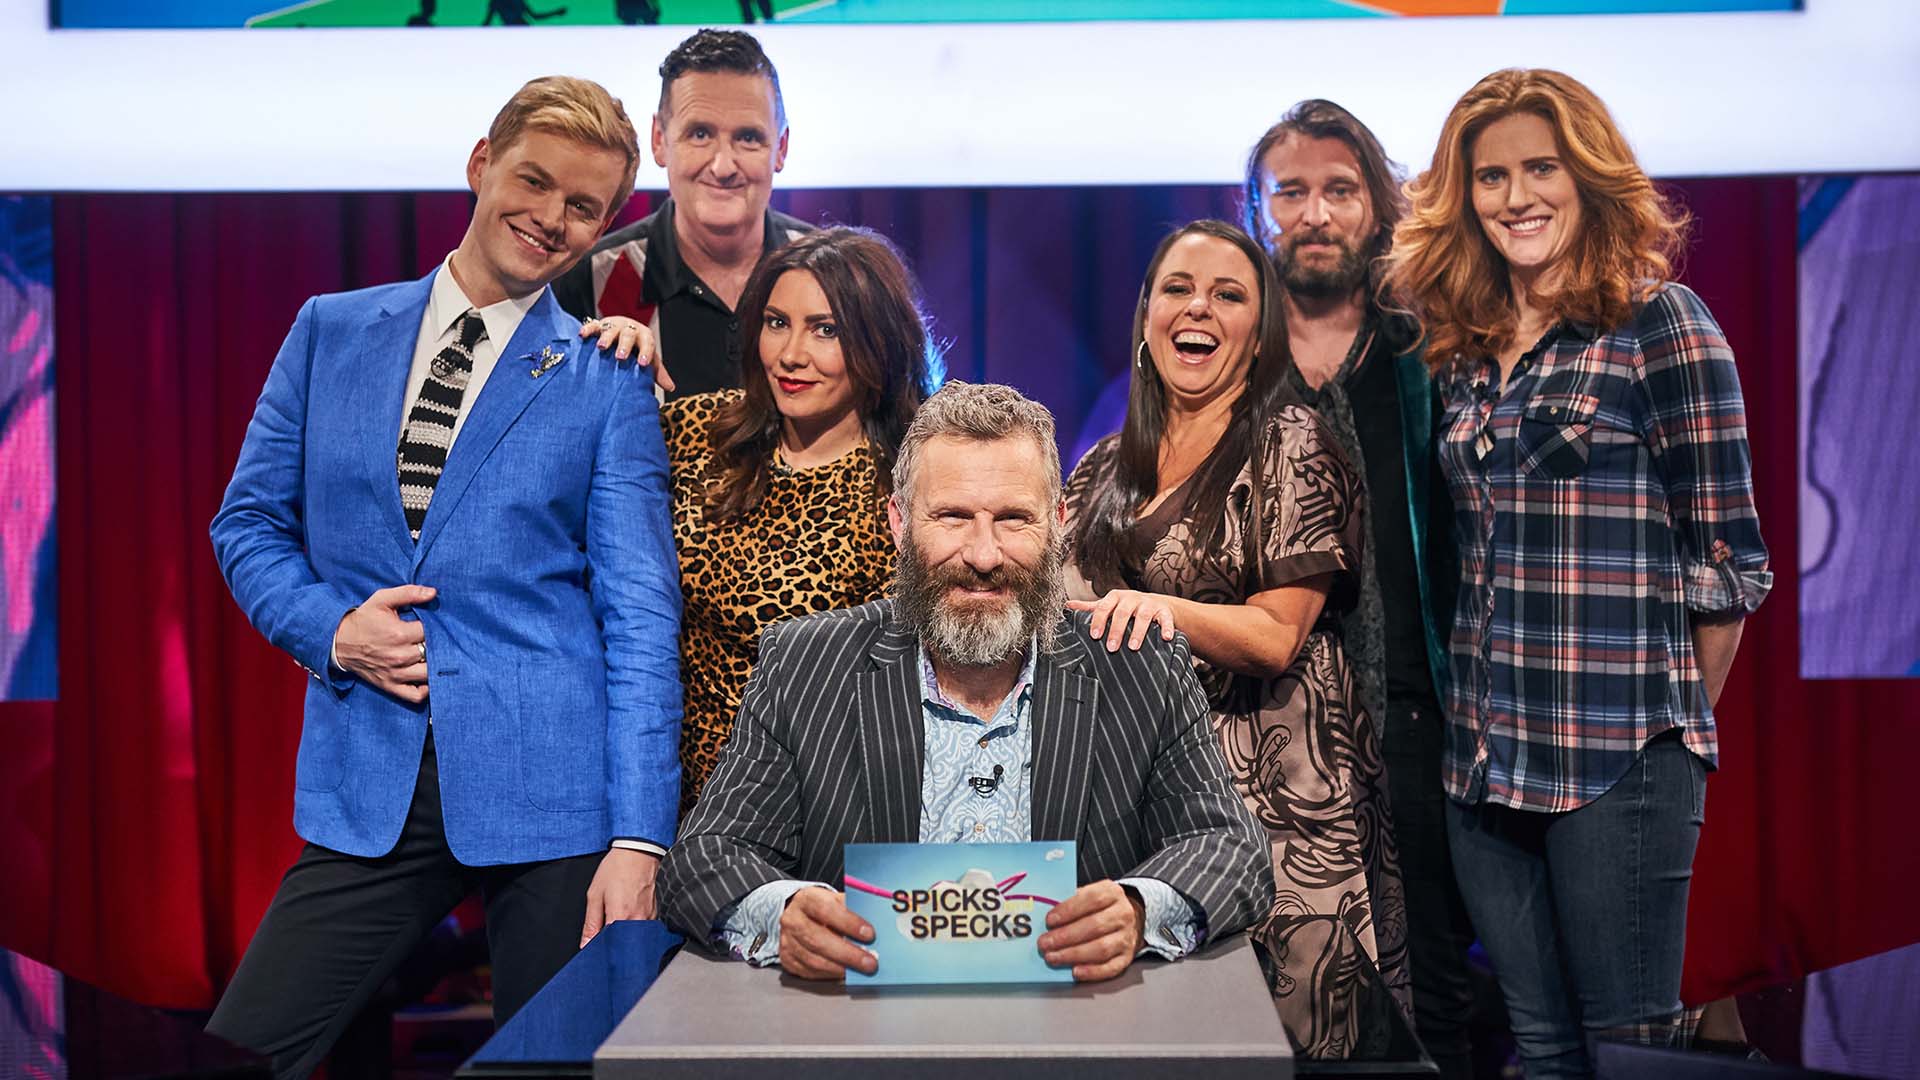 The ABC's Music Quiz Show 'Spicks and Specks' Is Devoting Its Next Special to Early 2000s Tunes